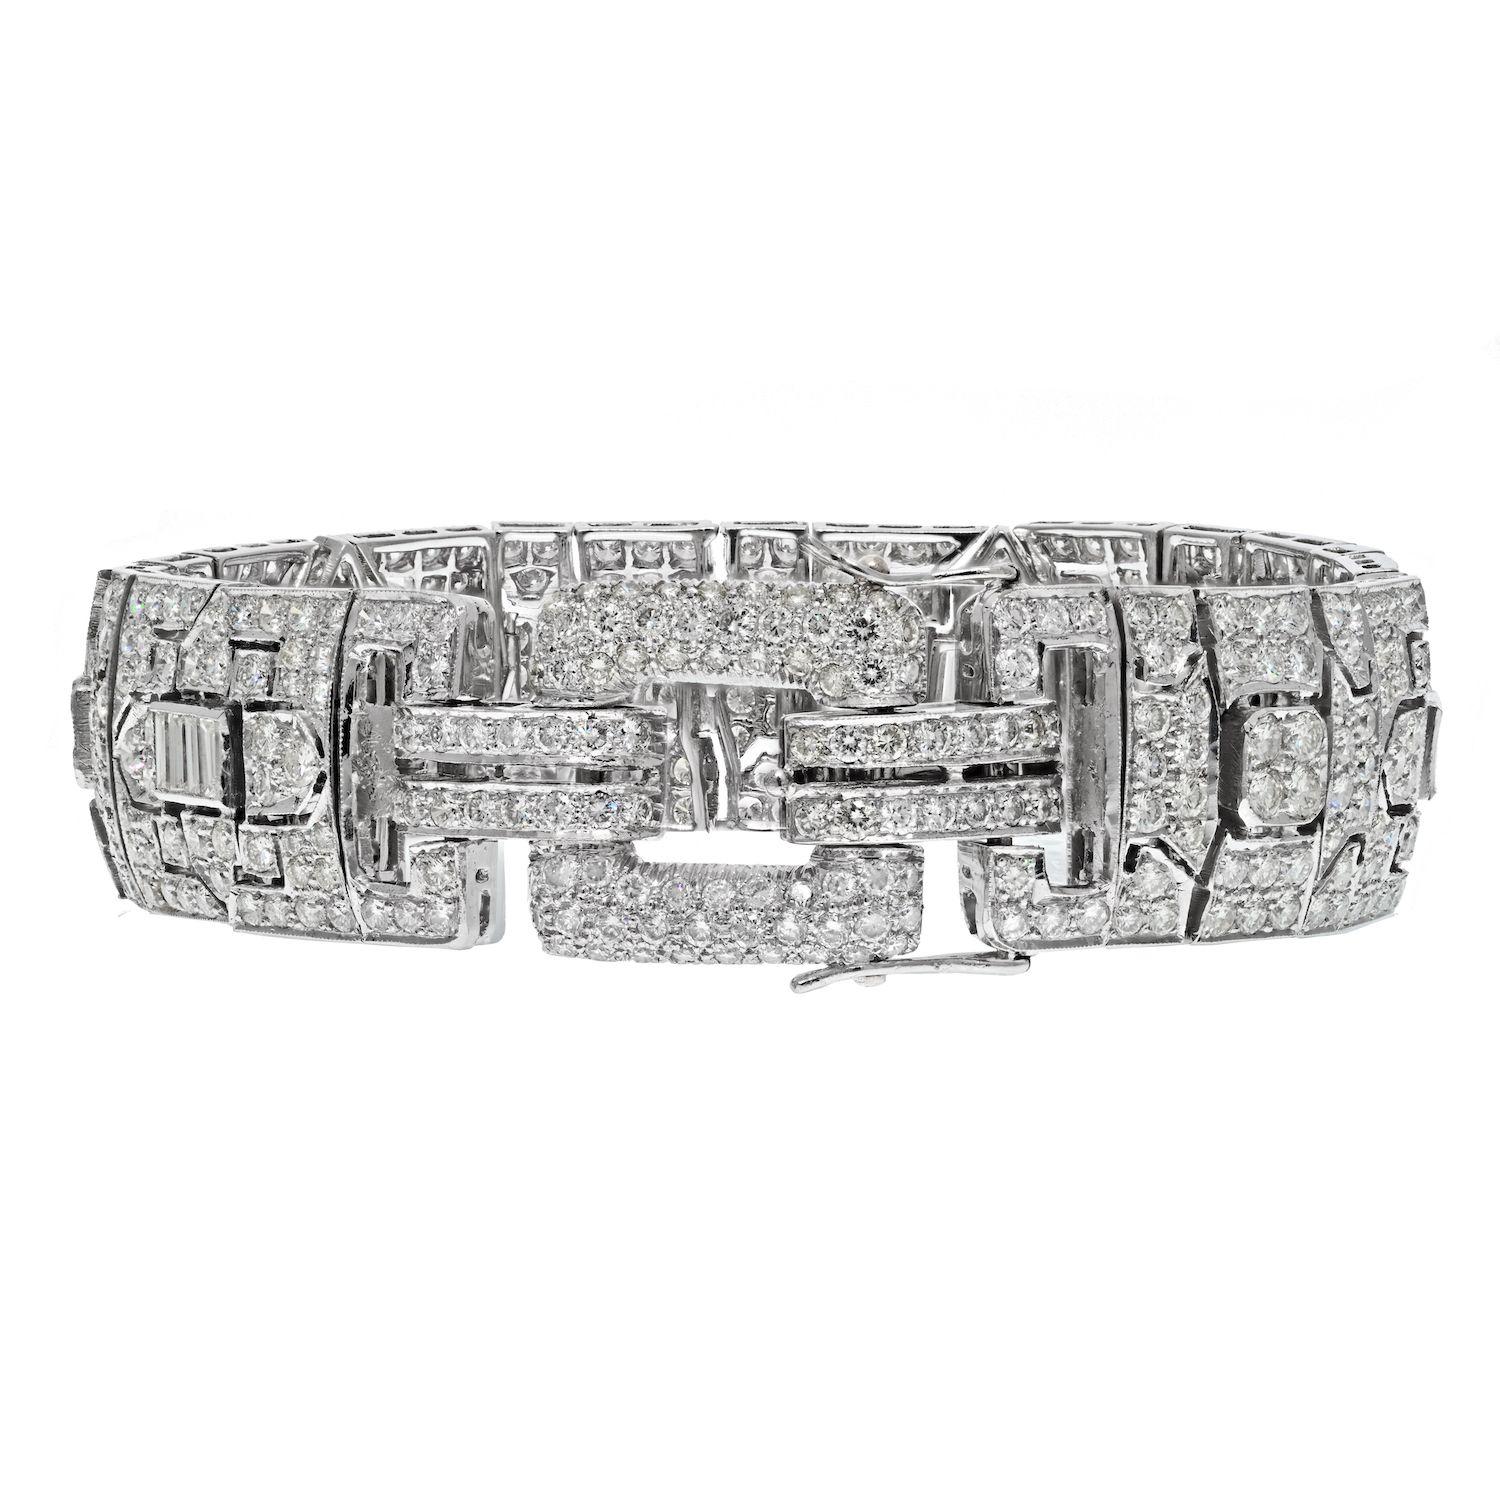 Exceptional 18K White Gold 20 Carat Estate Diamond Bracelet. Crafted in 18k white gold, mounted with various cut diamonds that total 20.00cttw.
Bracelet Width: 17mm 
Bracelet Length: 7.5 inches  
Folder over clasp with safety. 